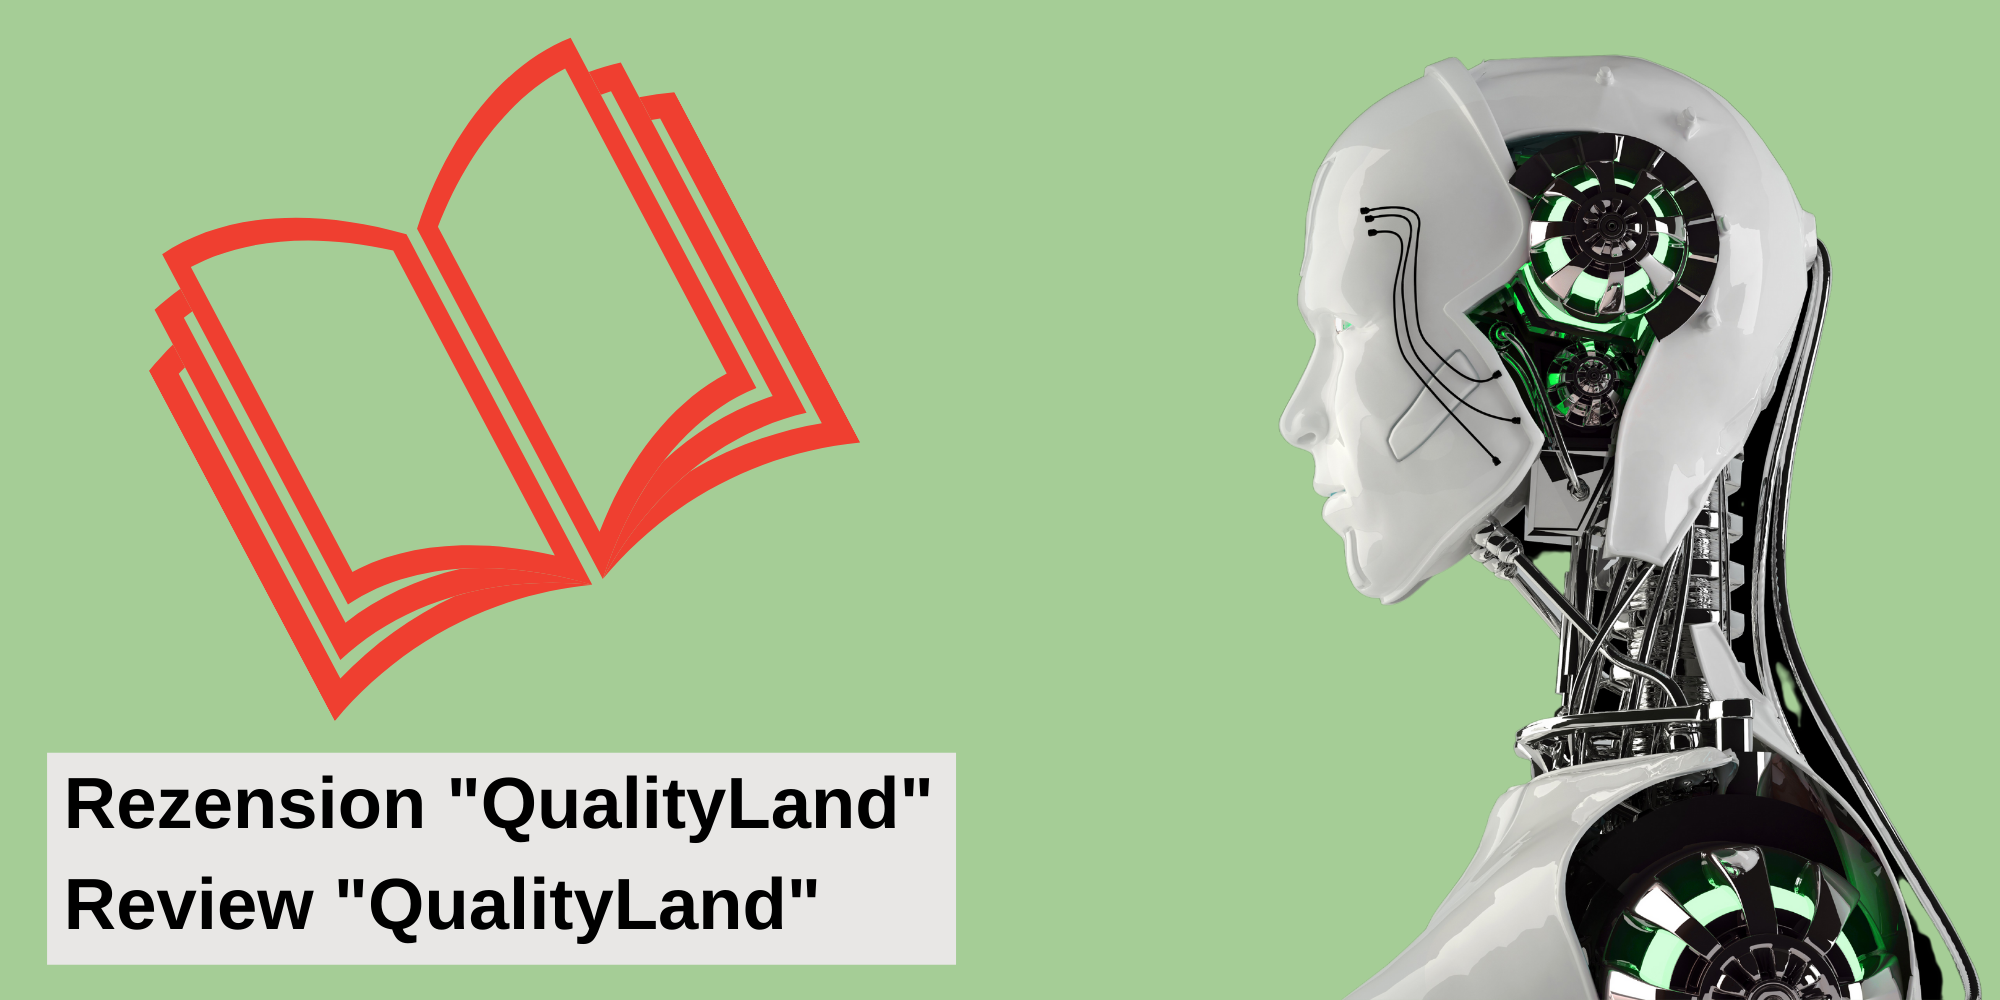 A review of "QualityLand" form Marc-Uwe Kling.